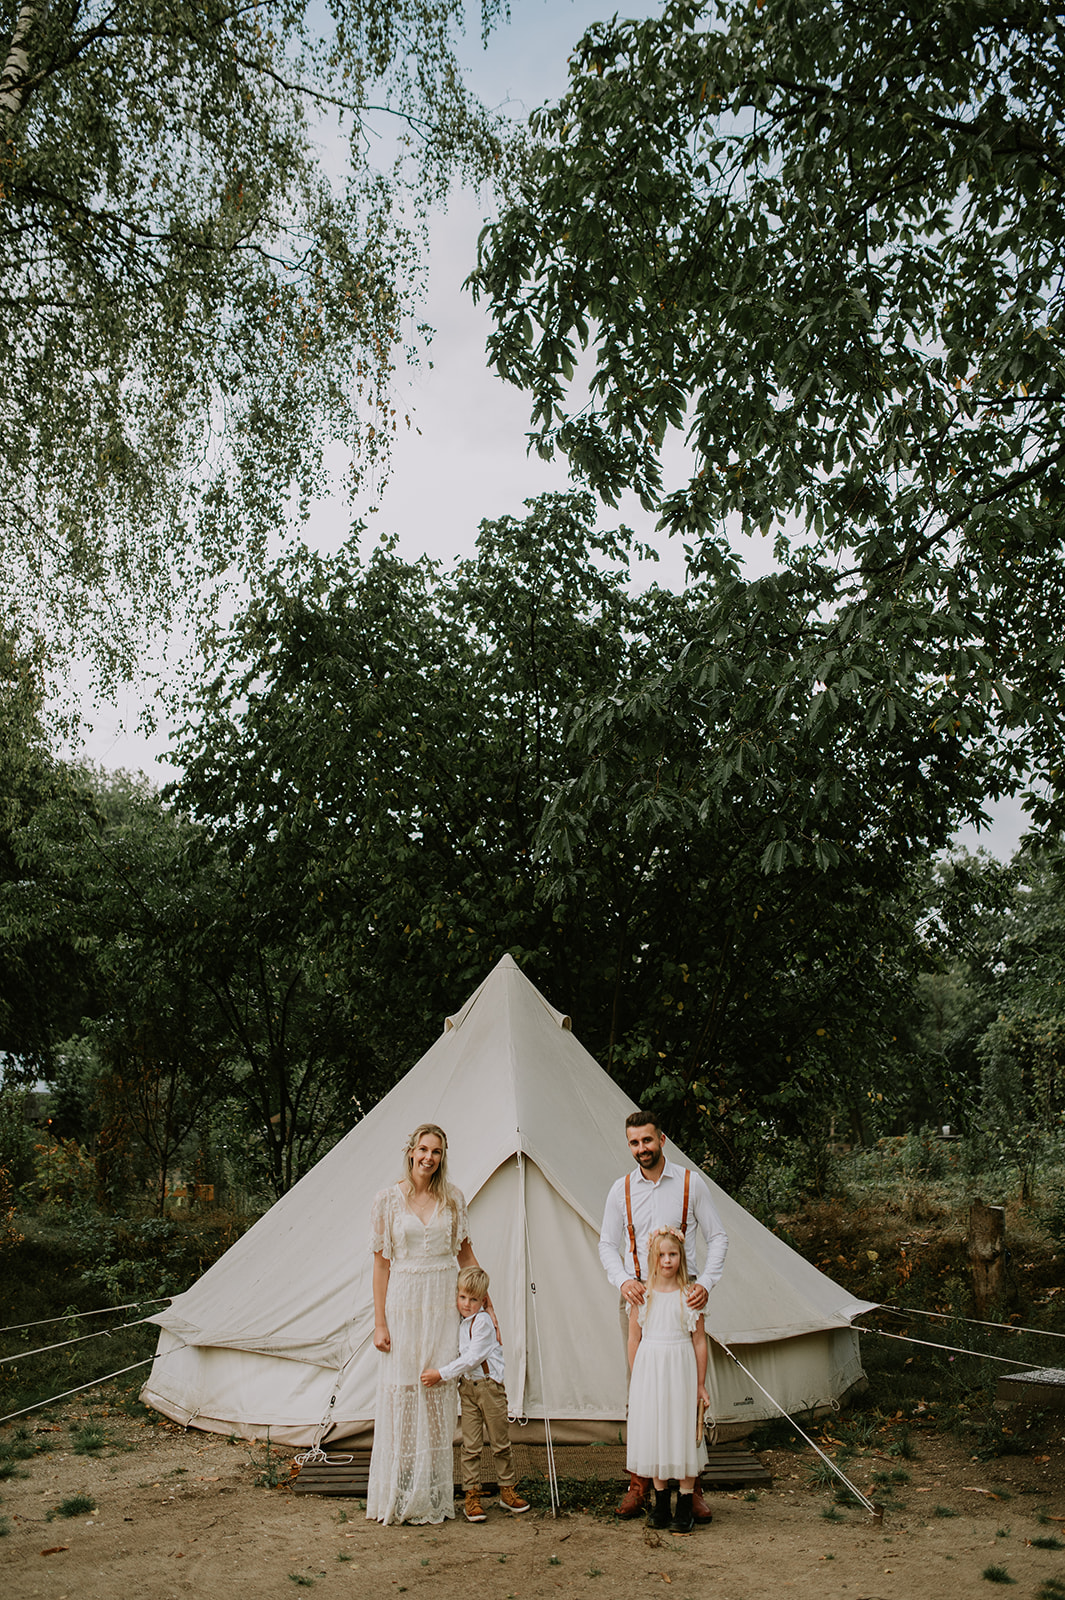 Elopement photographer in the Netherlands, Europe. Elopement with kids in a tiny house in the woods.
Elopement photograp